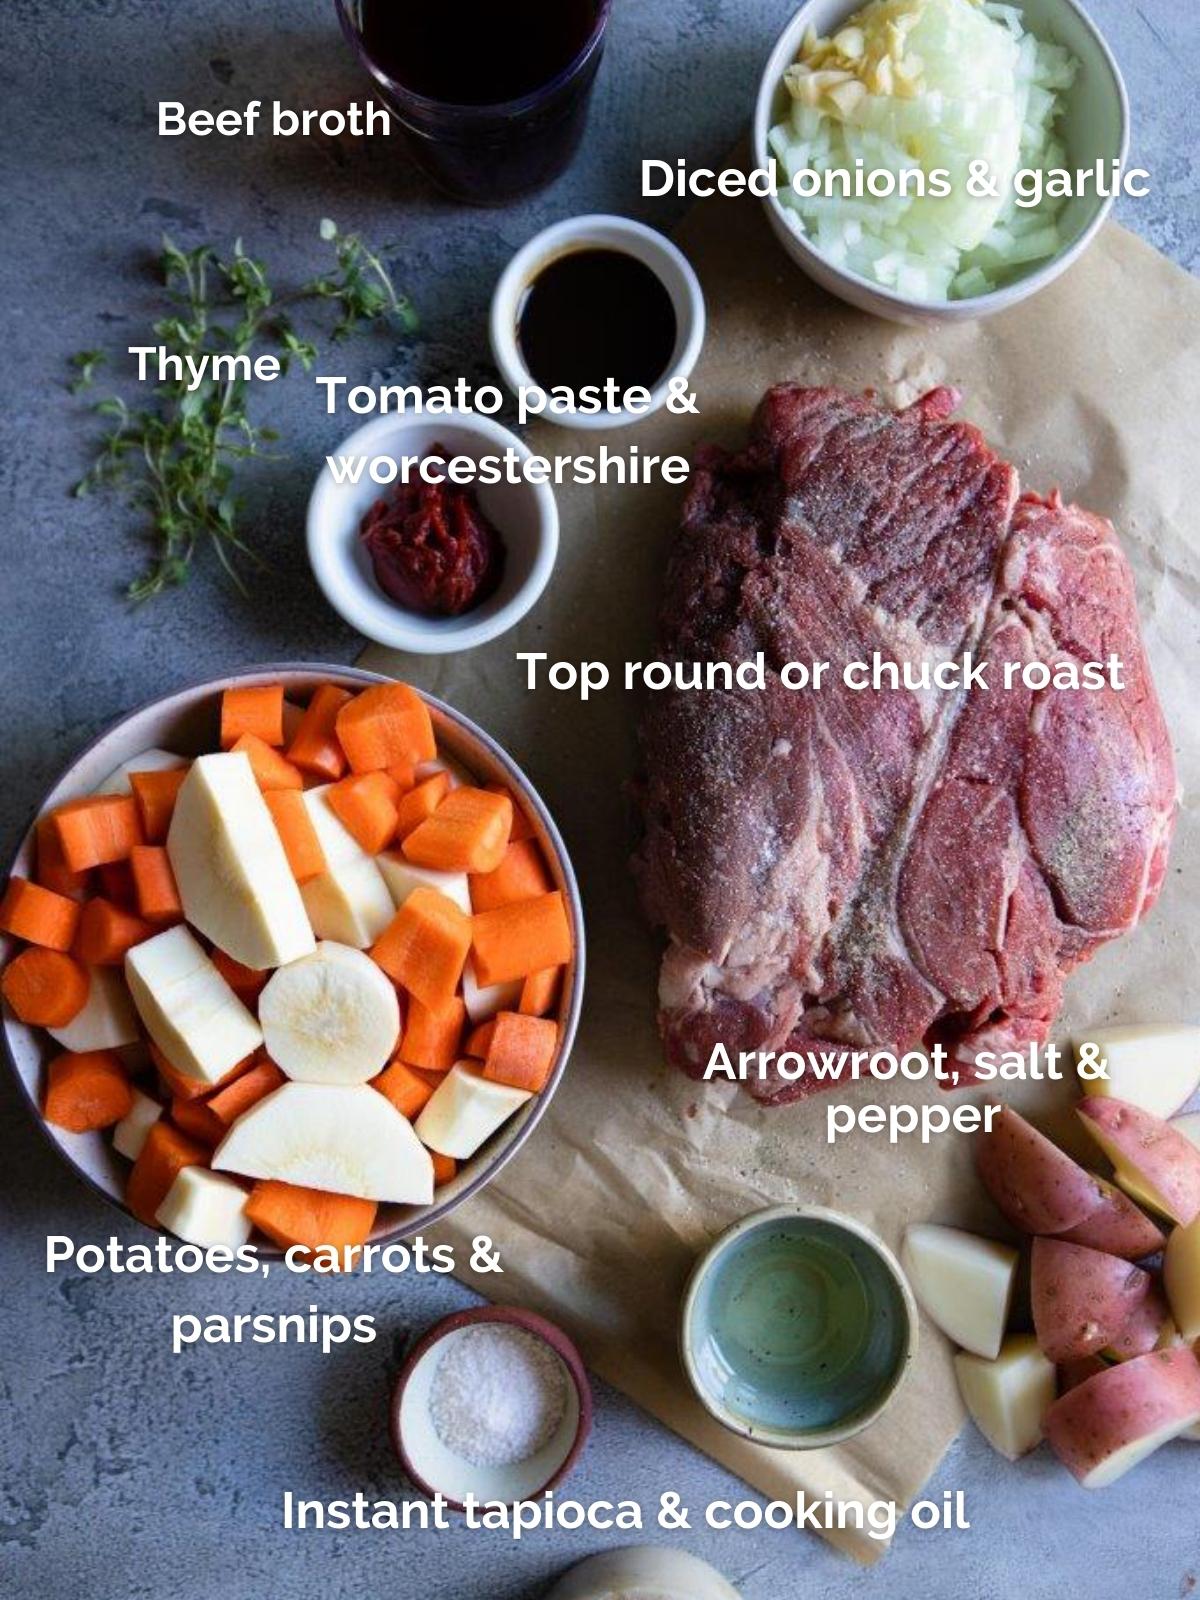 Slow-Cooker Round Steak Recipe: How to Make It